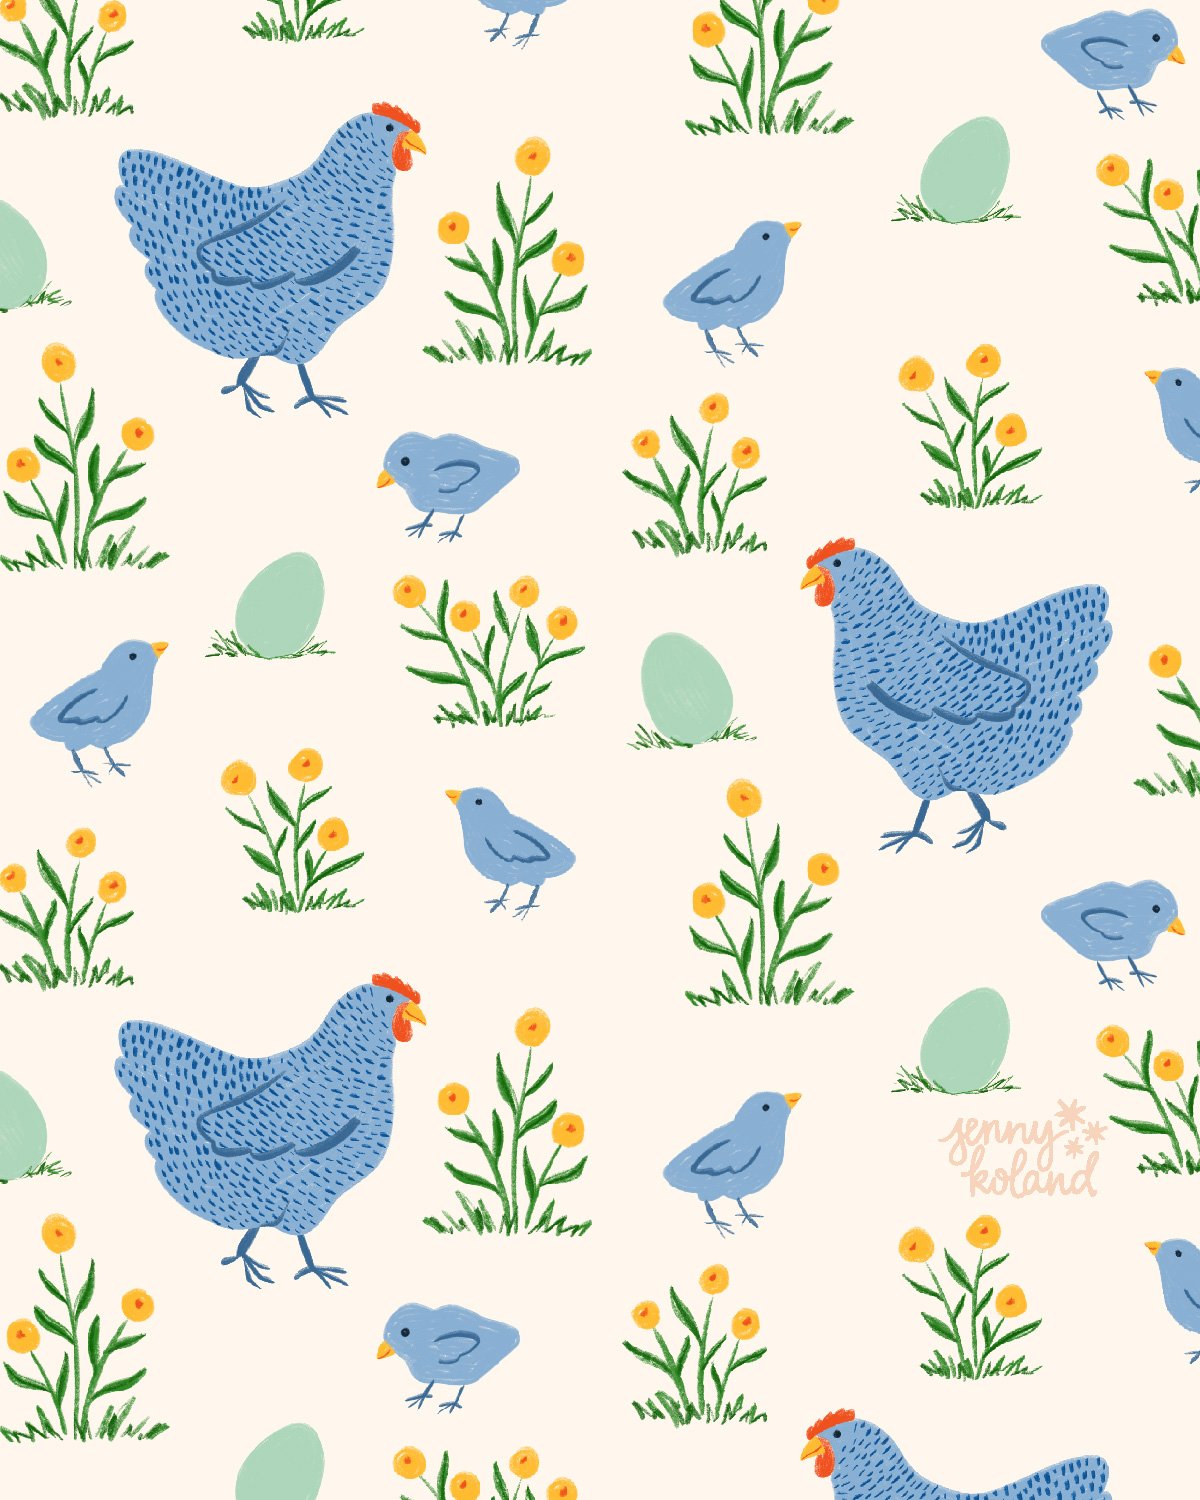 Chickens! 🥚 🐓 🥚 I turned my chicken illustration from the other day into a repeat and I love it a little too much. These colors are giving my all the spring feels! 

#chickenart #chickenpattern #chickenillustration #surfacedesign #surfacepatternde